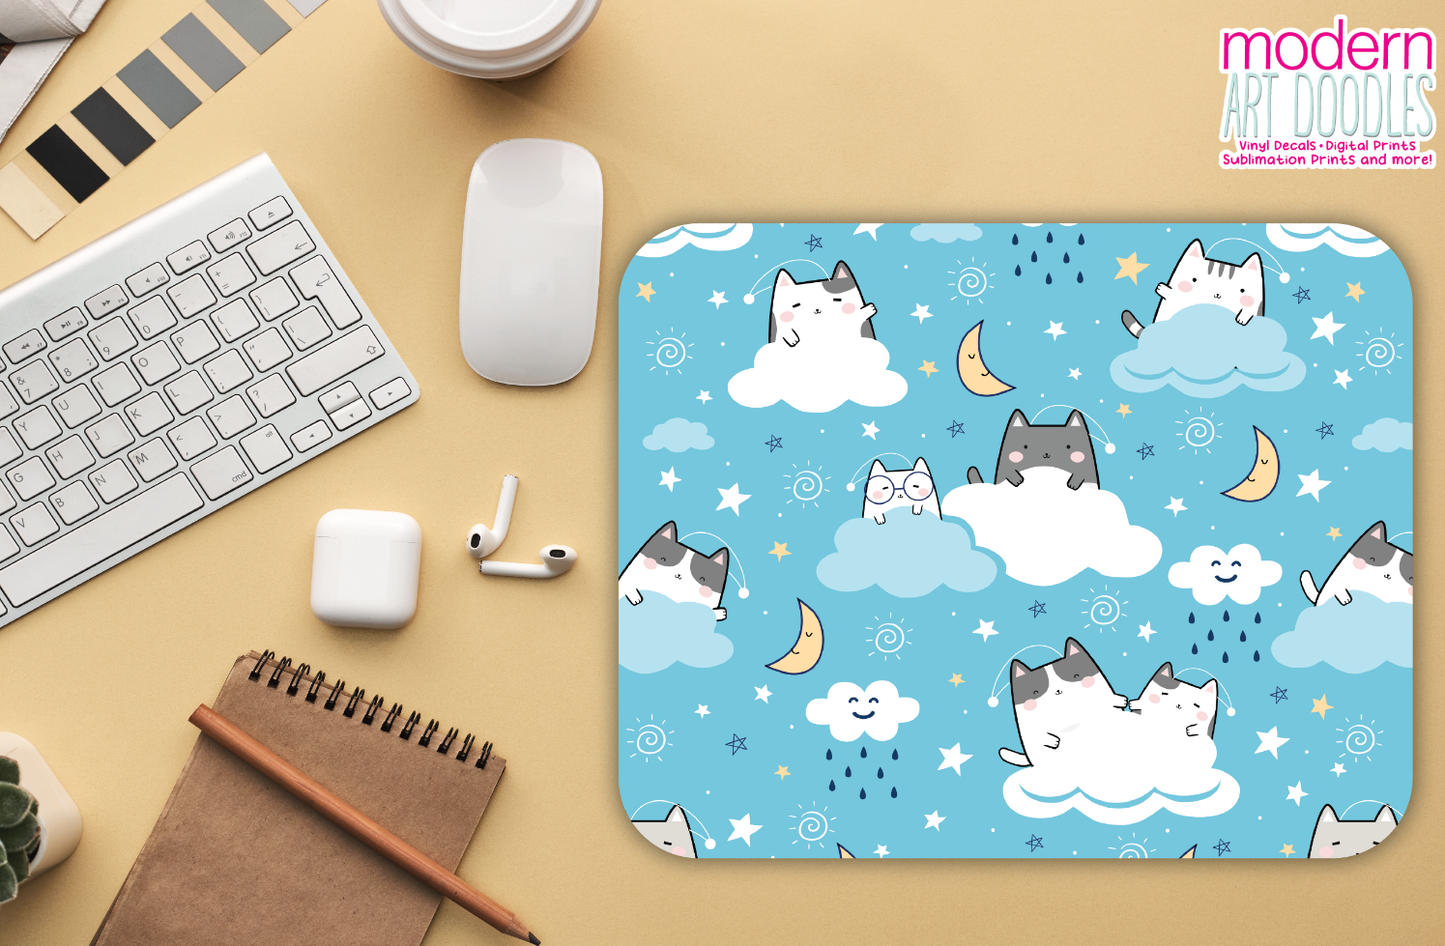 Blue Cute Kawaii Gaming Mouse pad, Computer Keyboard Office Accessories, Cute Office Decor